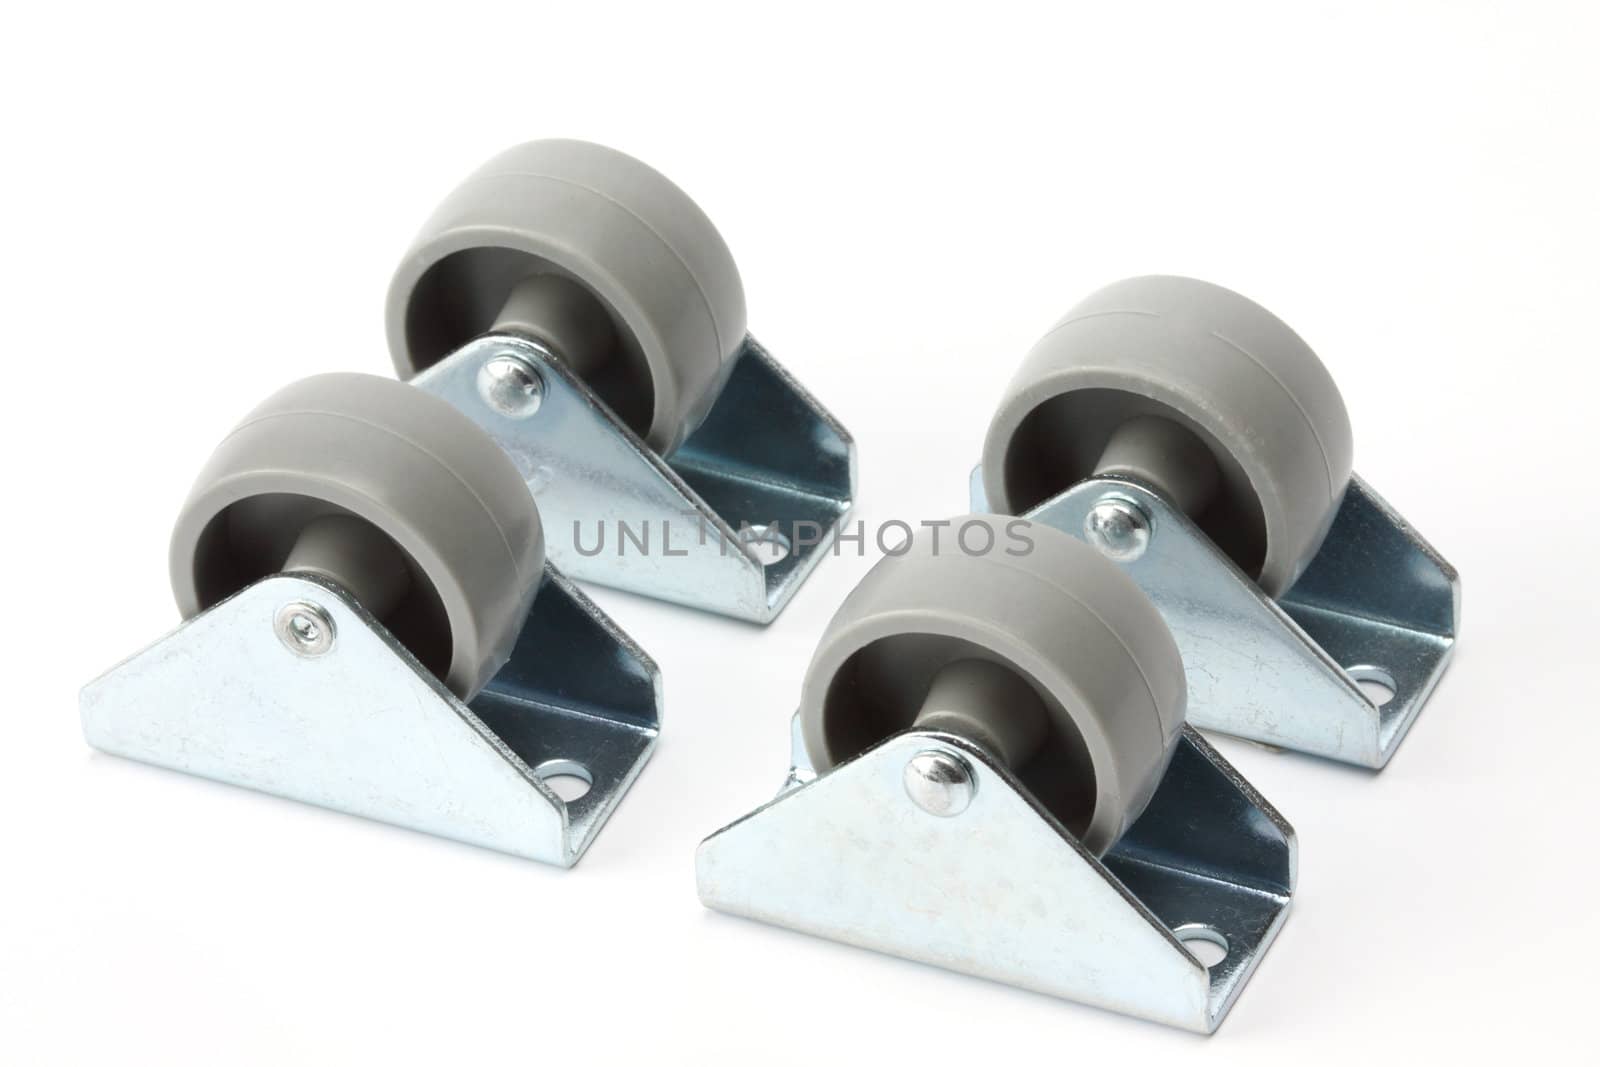 Furniture casters close up on white background 